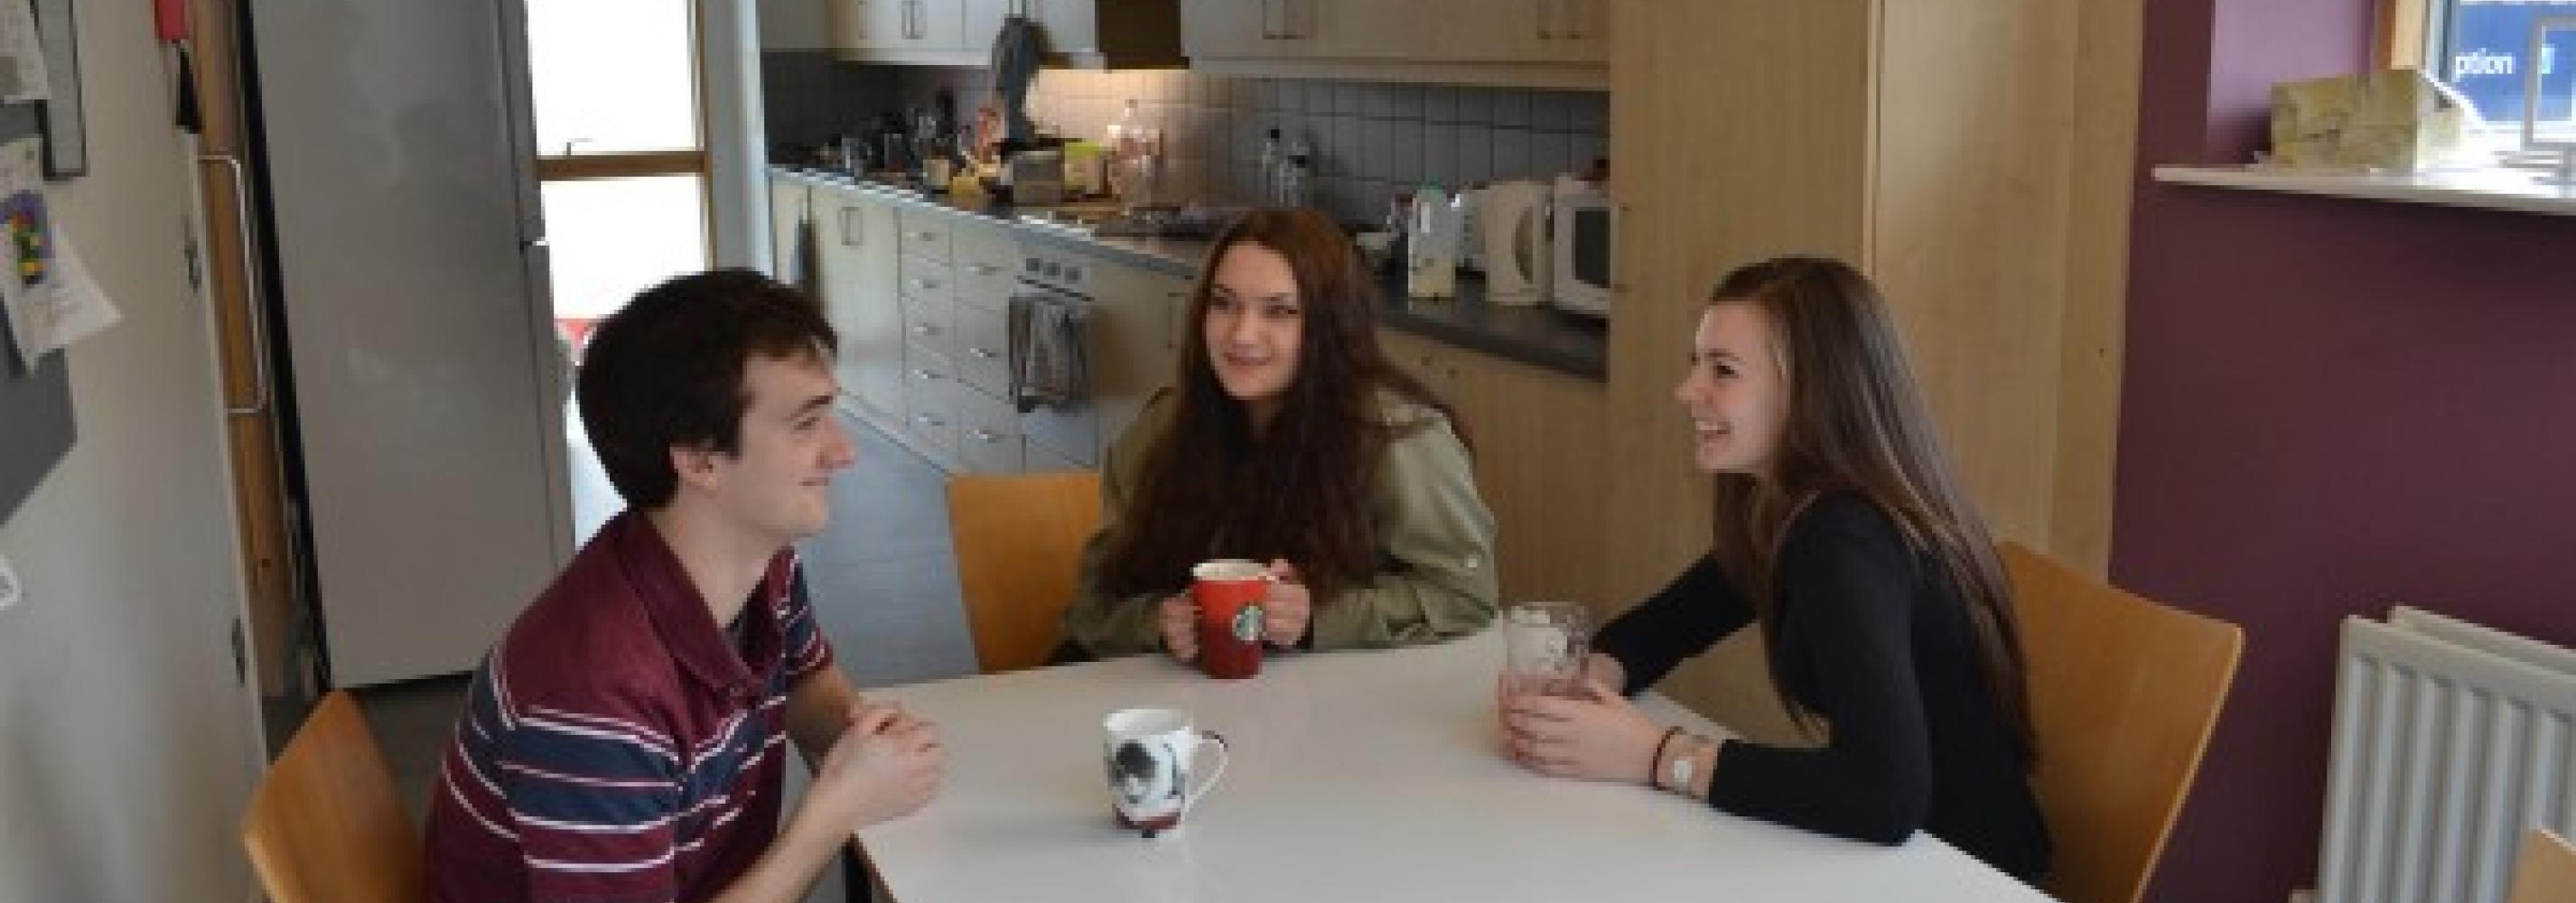 Students sat at dining table in a kitchen area with fridge freezer, oven, sink, kettle, toaster and microwave